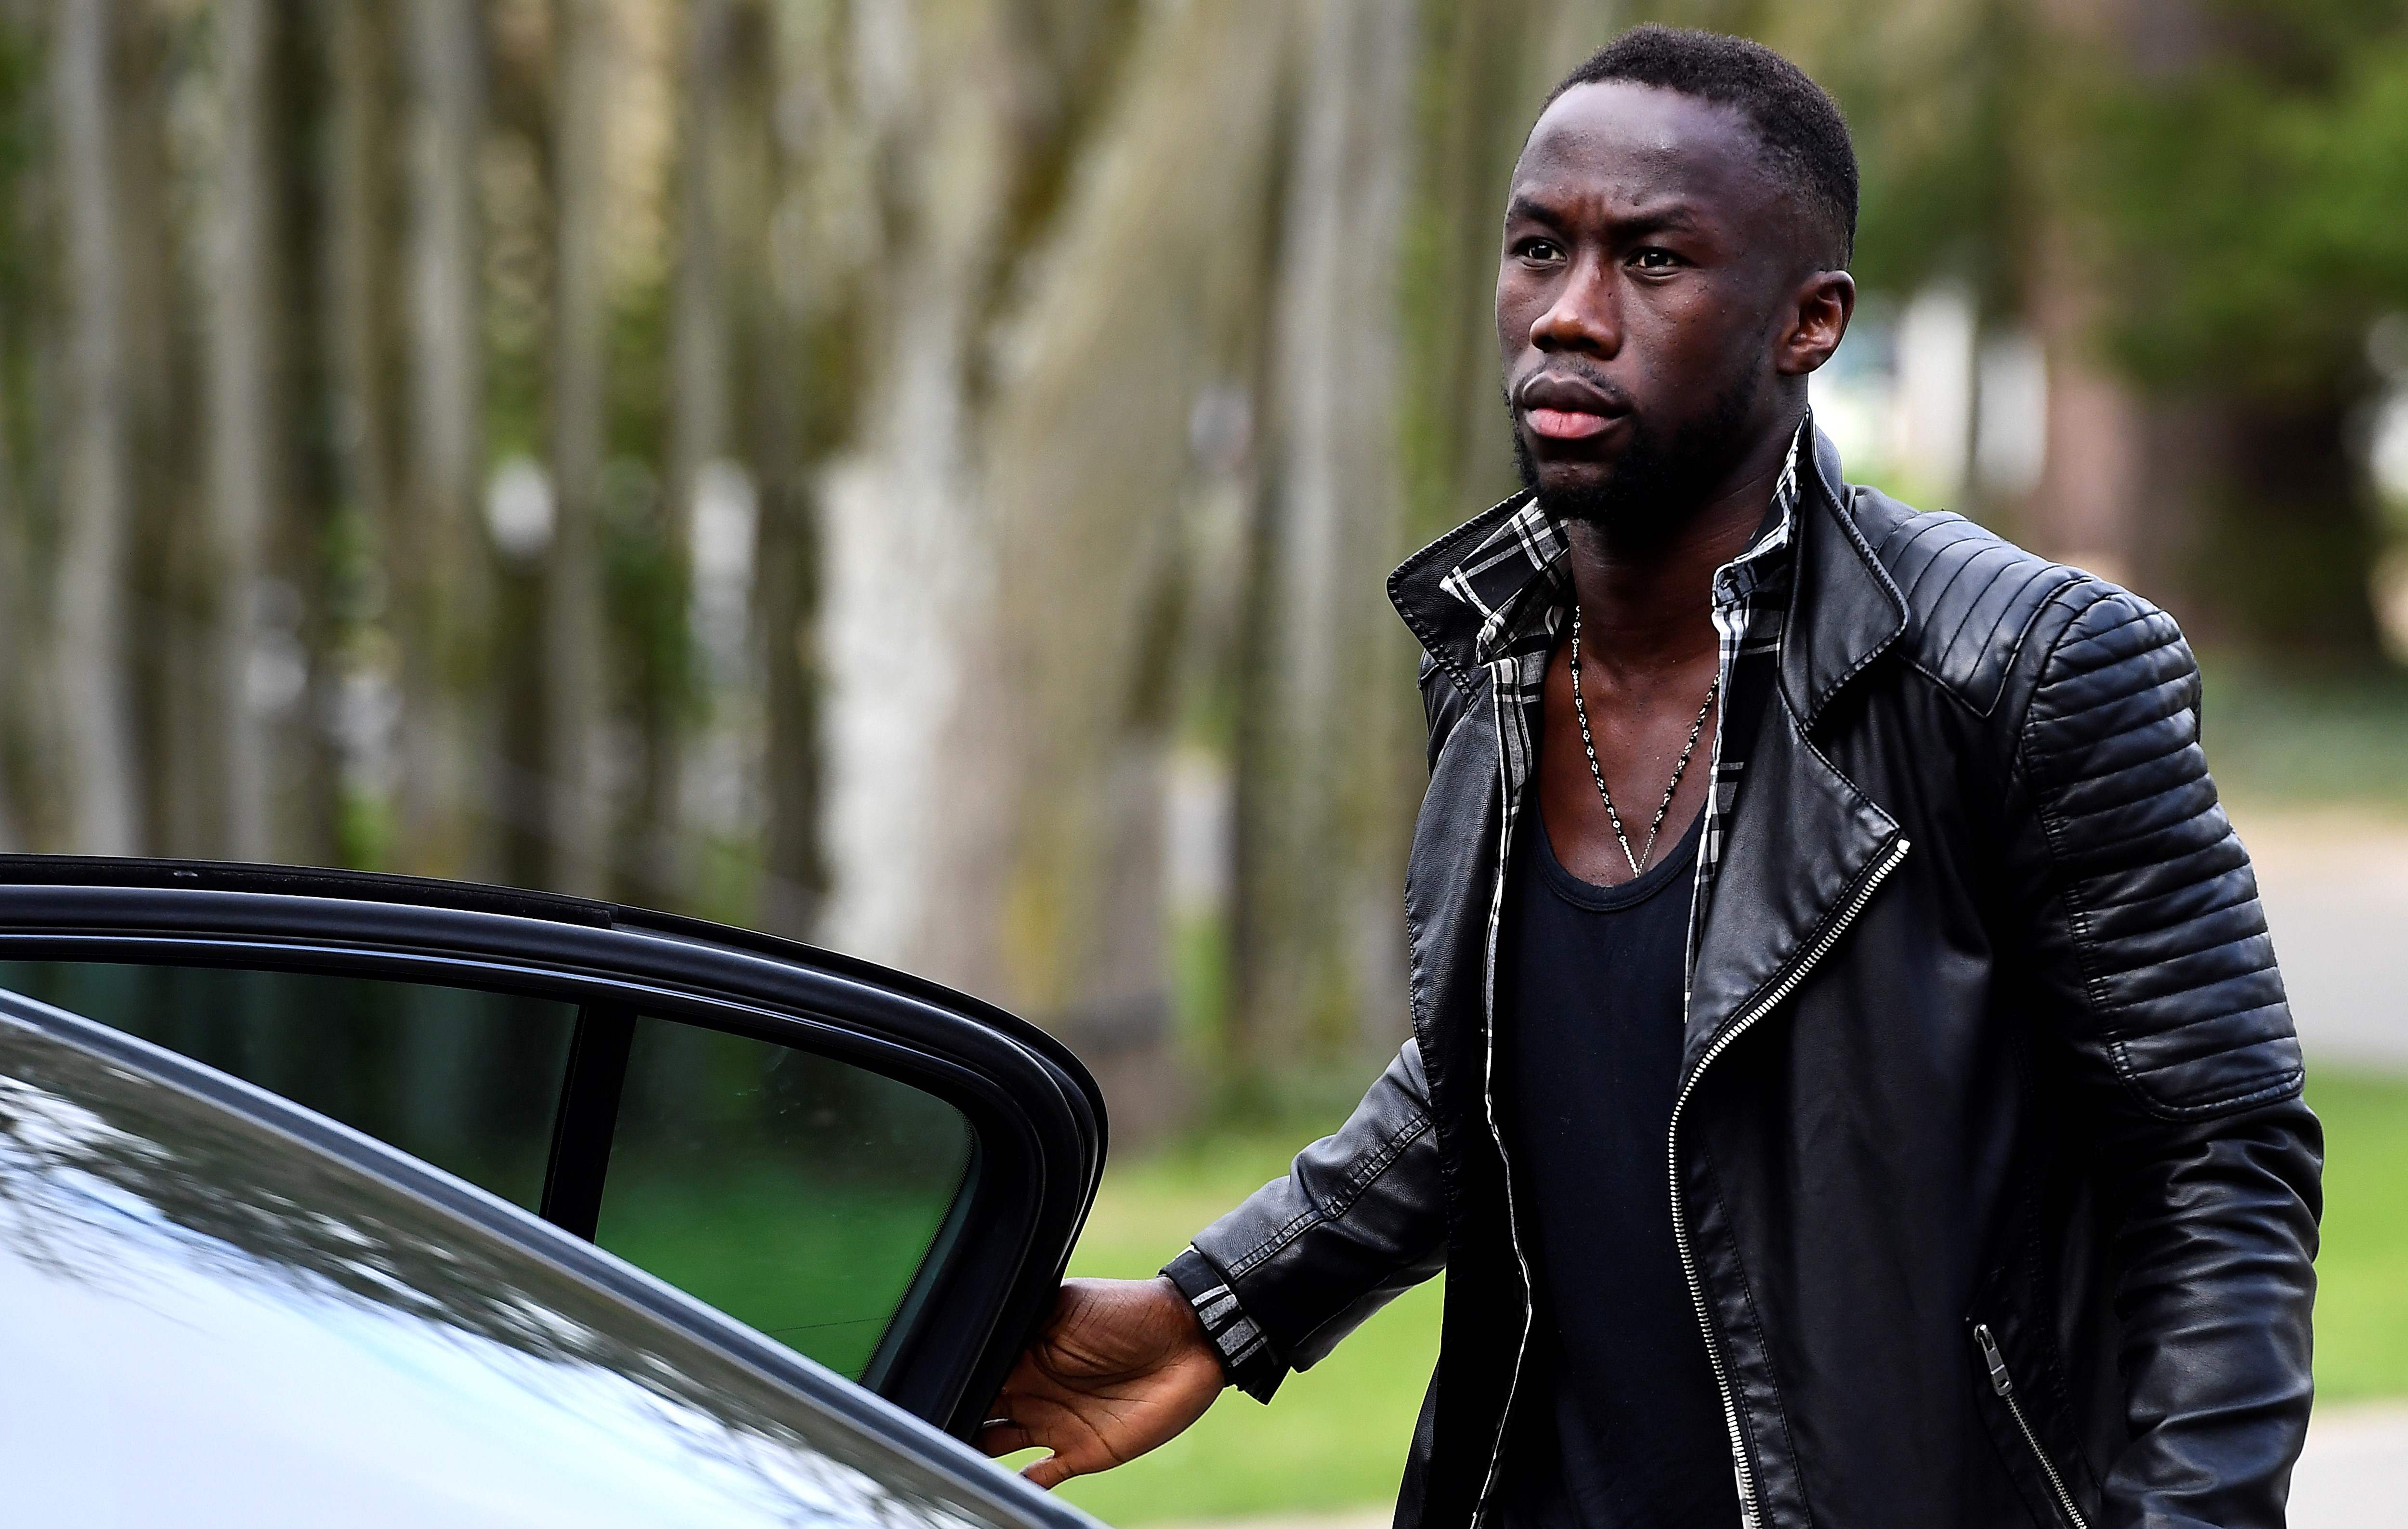 He revealed how he got his big break through working with footie legend Bacary Sagna